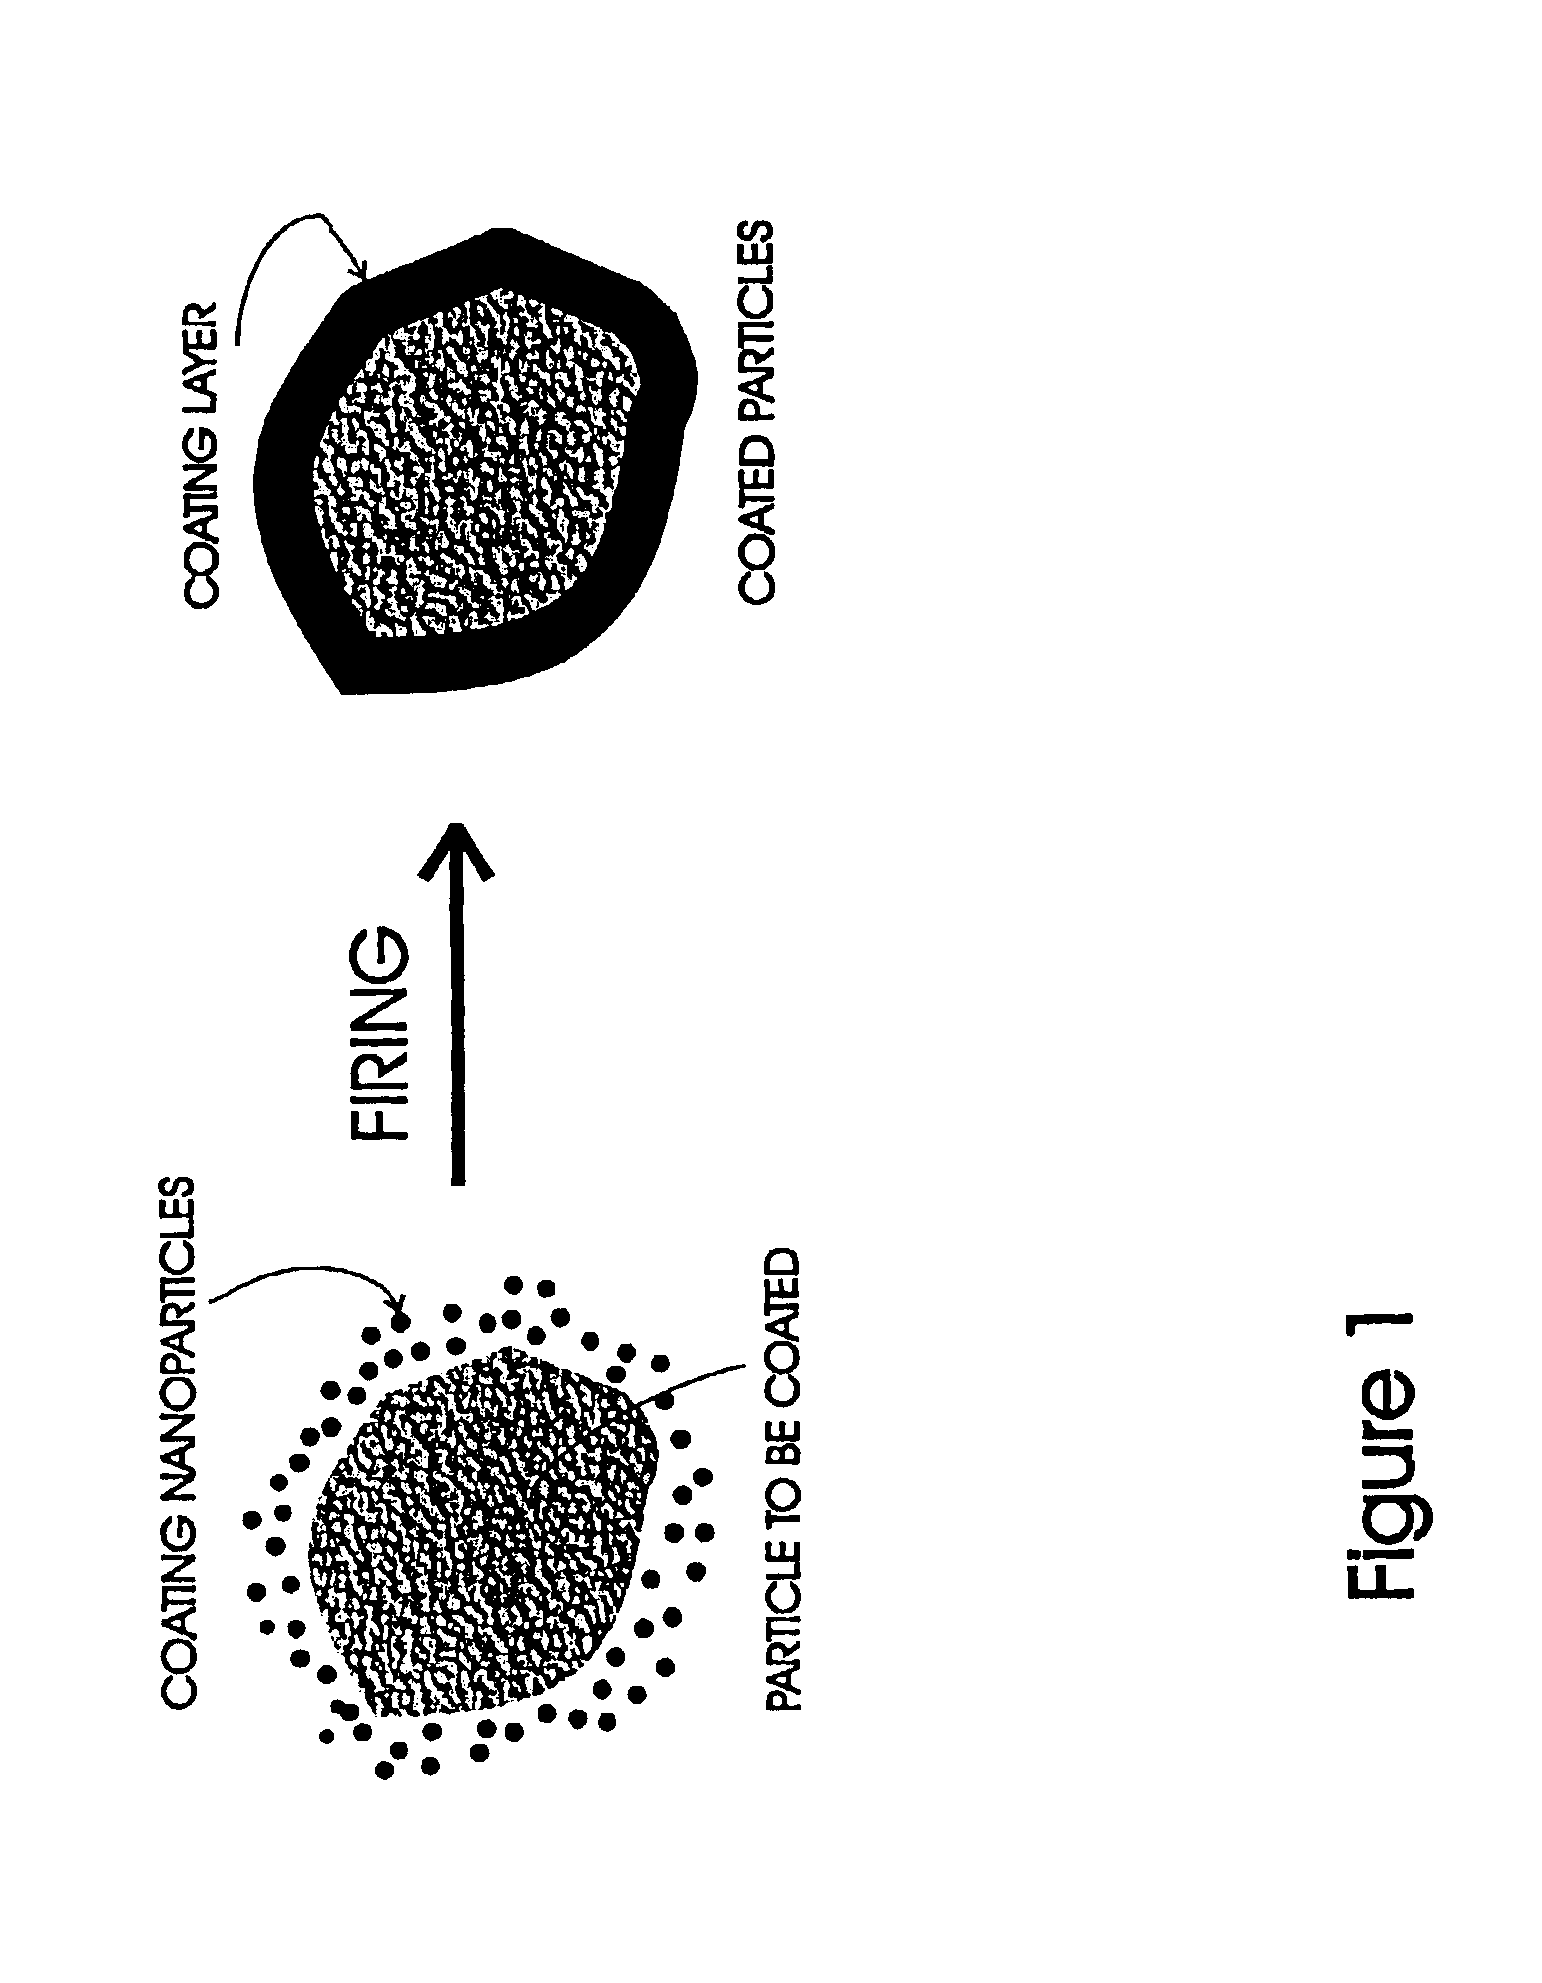 Method of coating micrometer sized inorganic particles